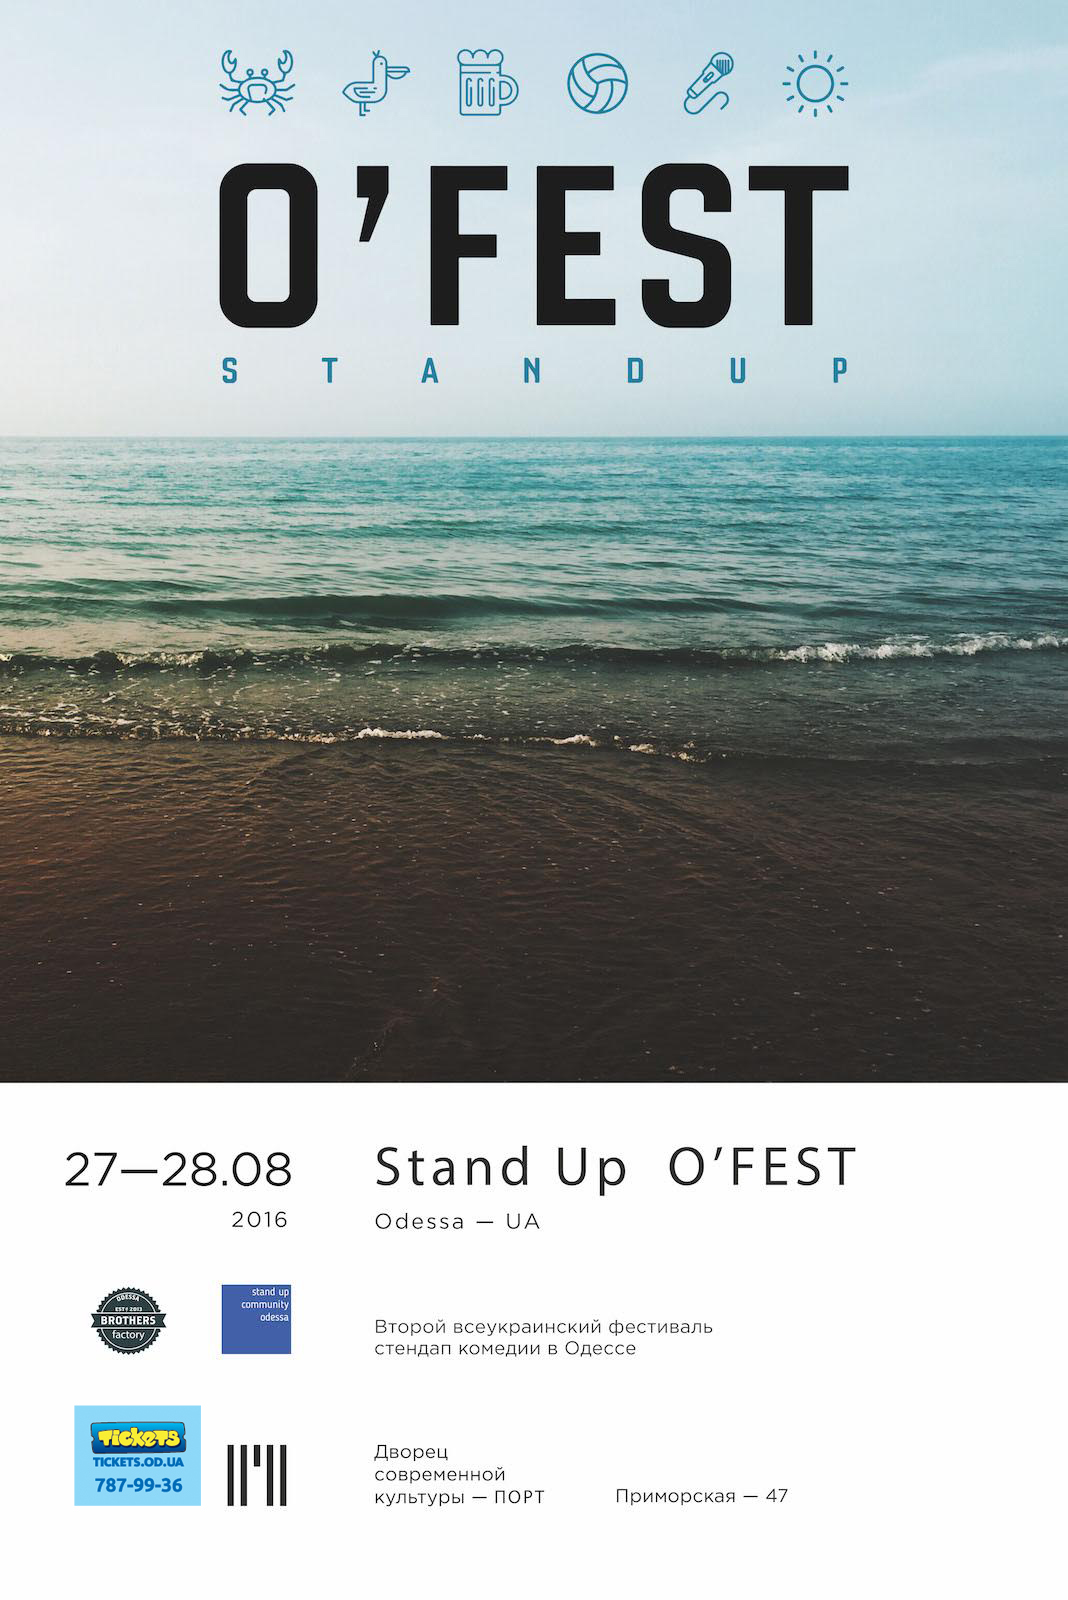 Stand Up O’Fest